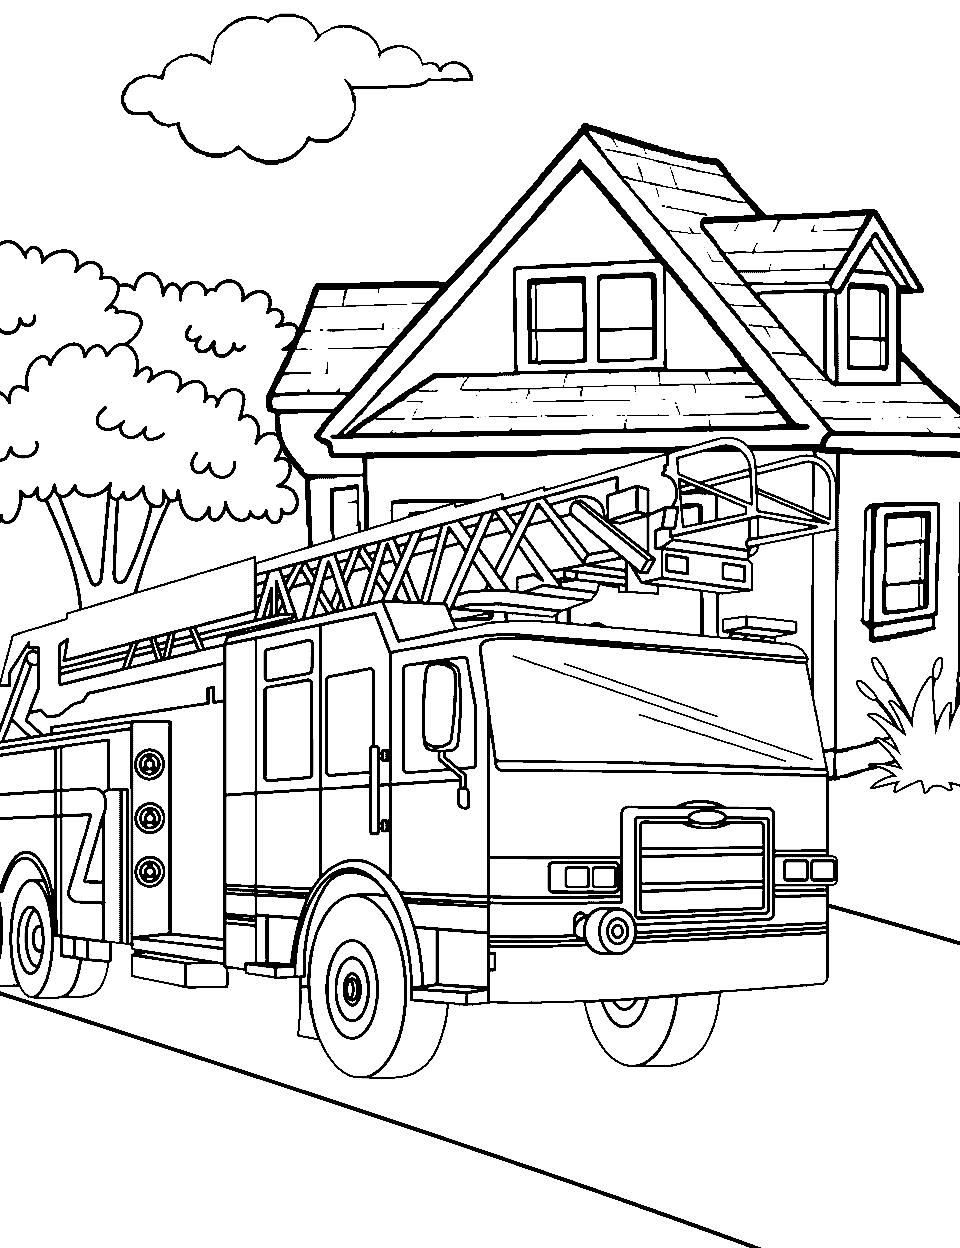 Suburban Fire Rescue Truck Coloring Page - A fire truck in a suburban neighborhood.